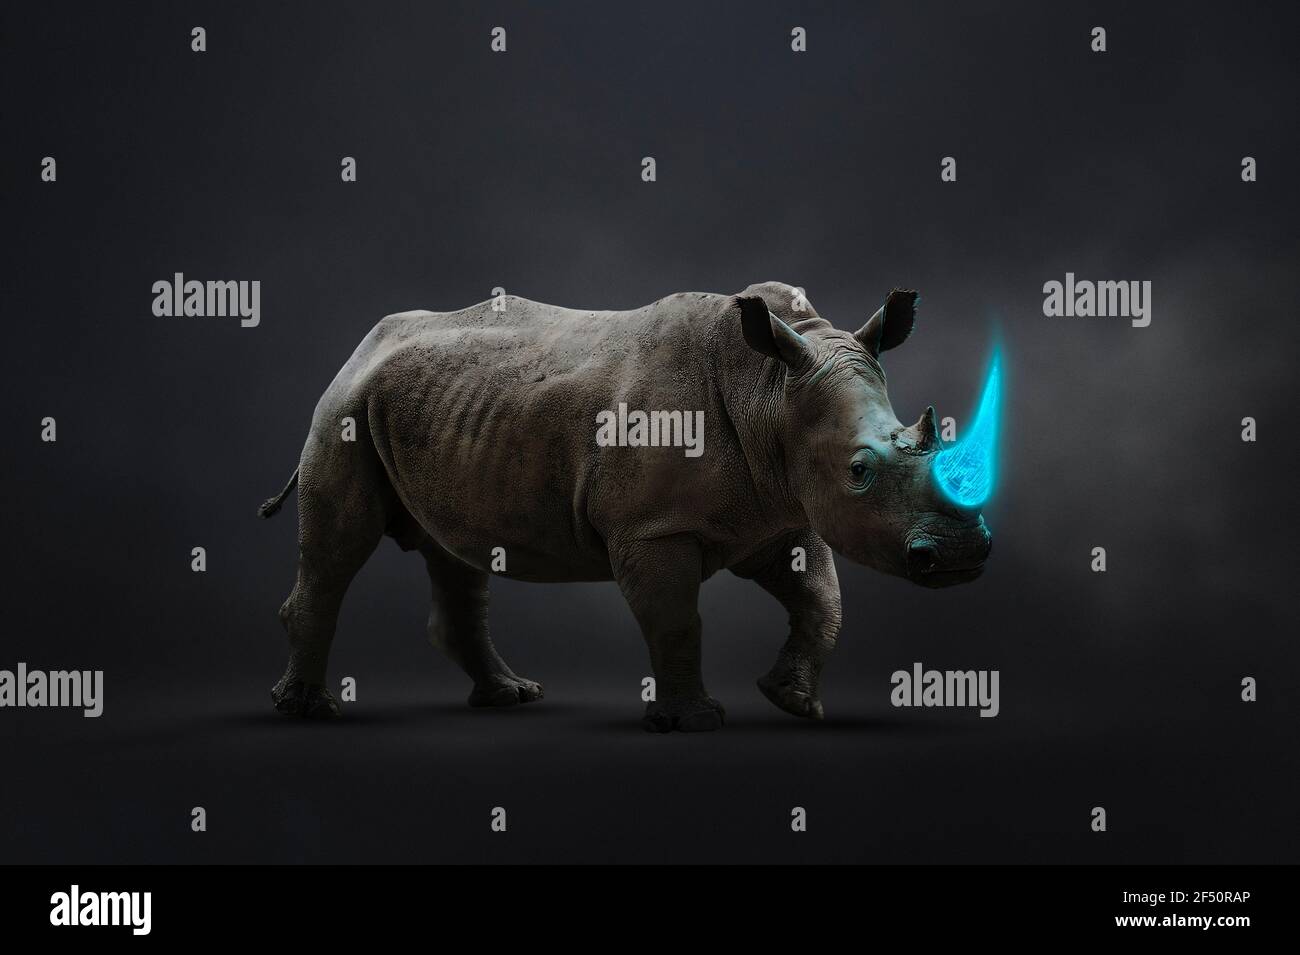 Rhinoceros with blue tusk vulnerable to poaching Stock Photo